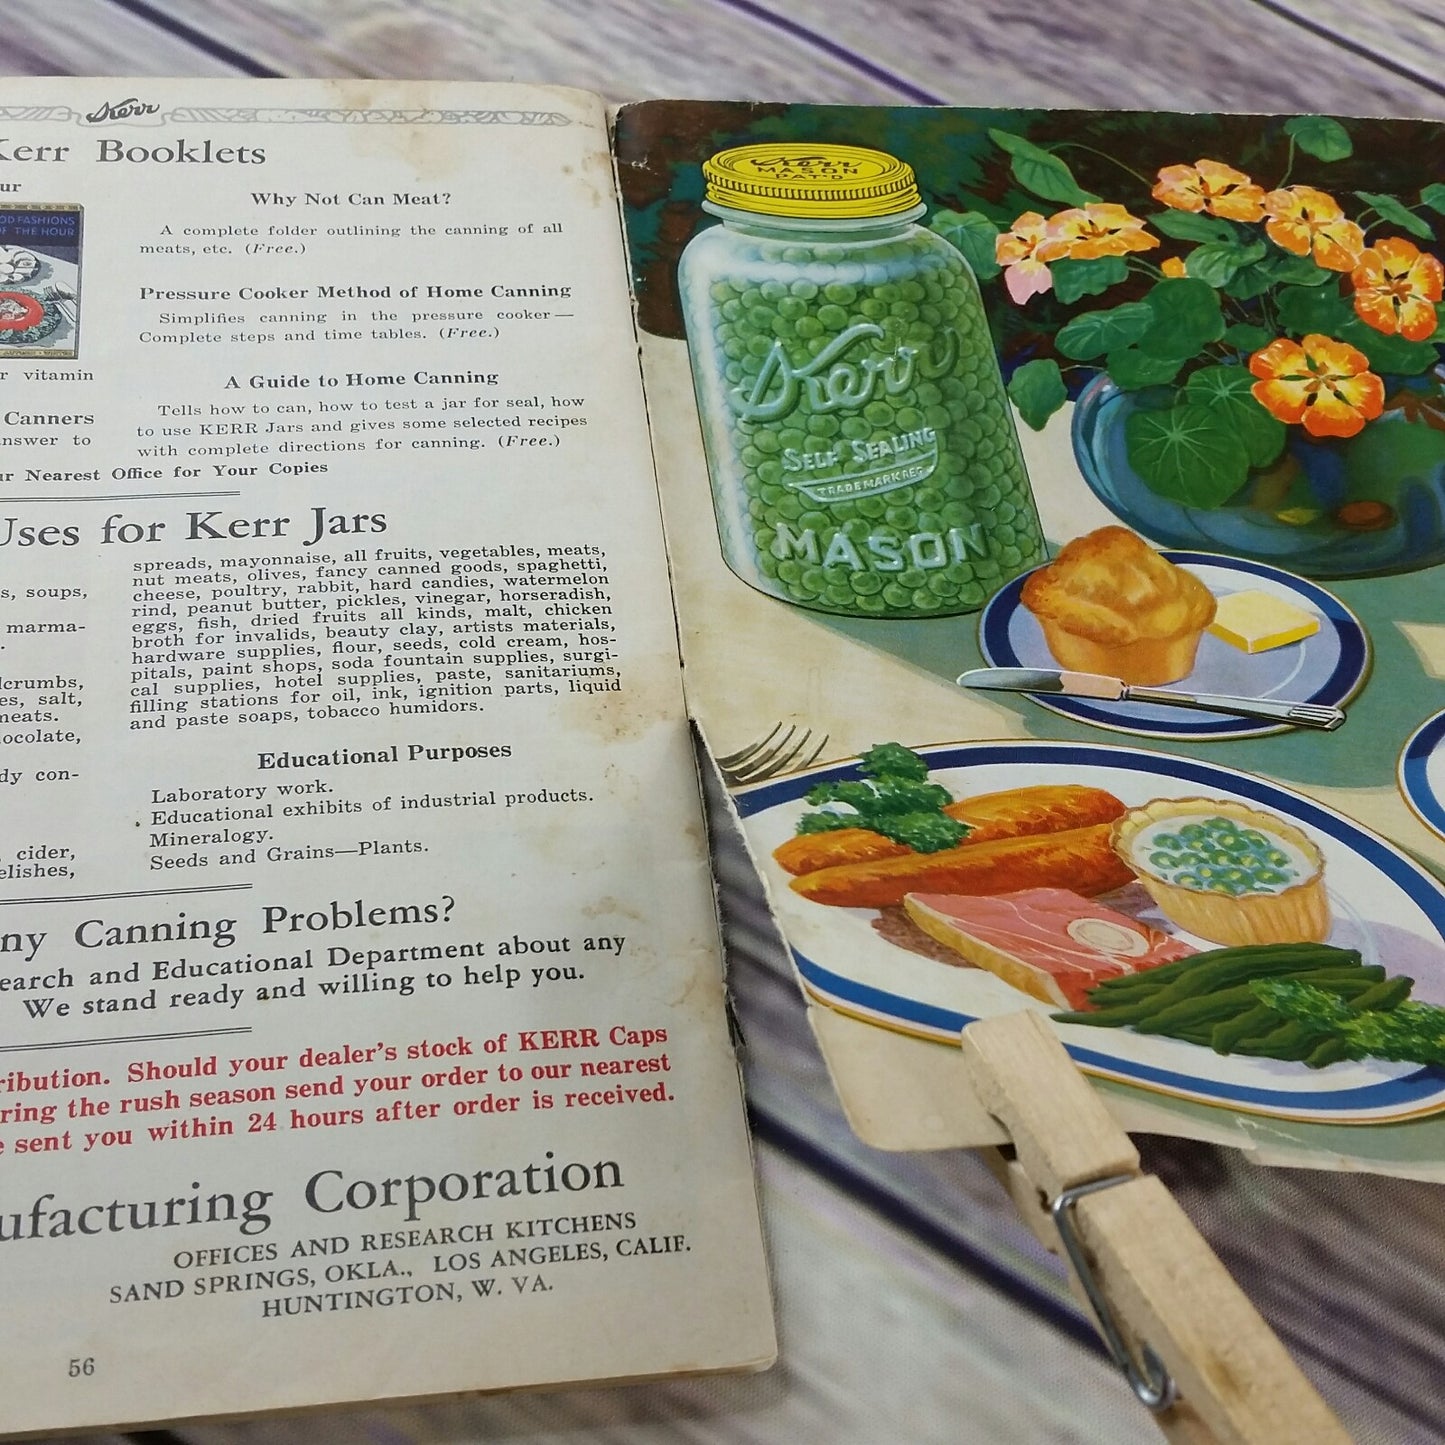 Vintage Kerr Home Canning Book Cookbook Recipes 1937 Booklet Yellow Black Cover Canning Tips Food Preservation - At Grandma's Table